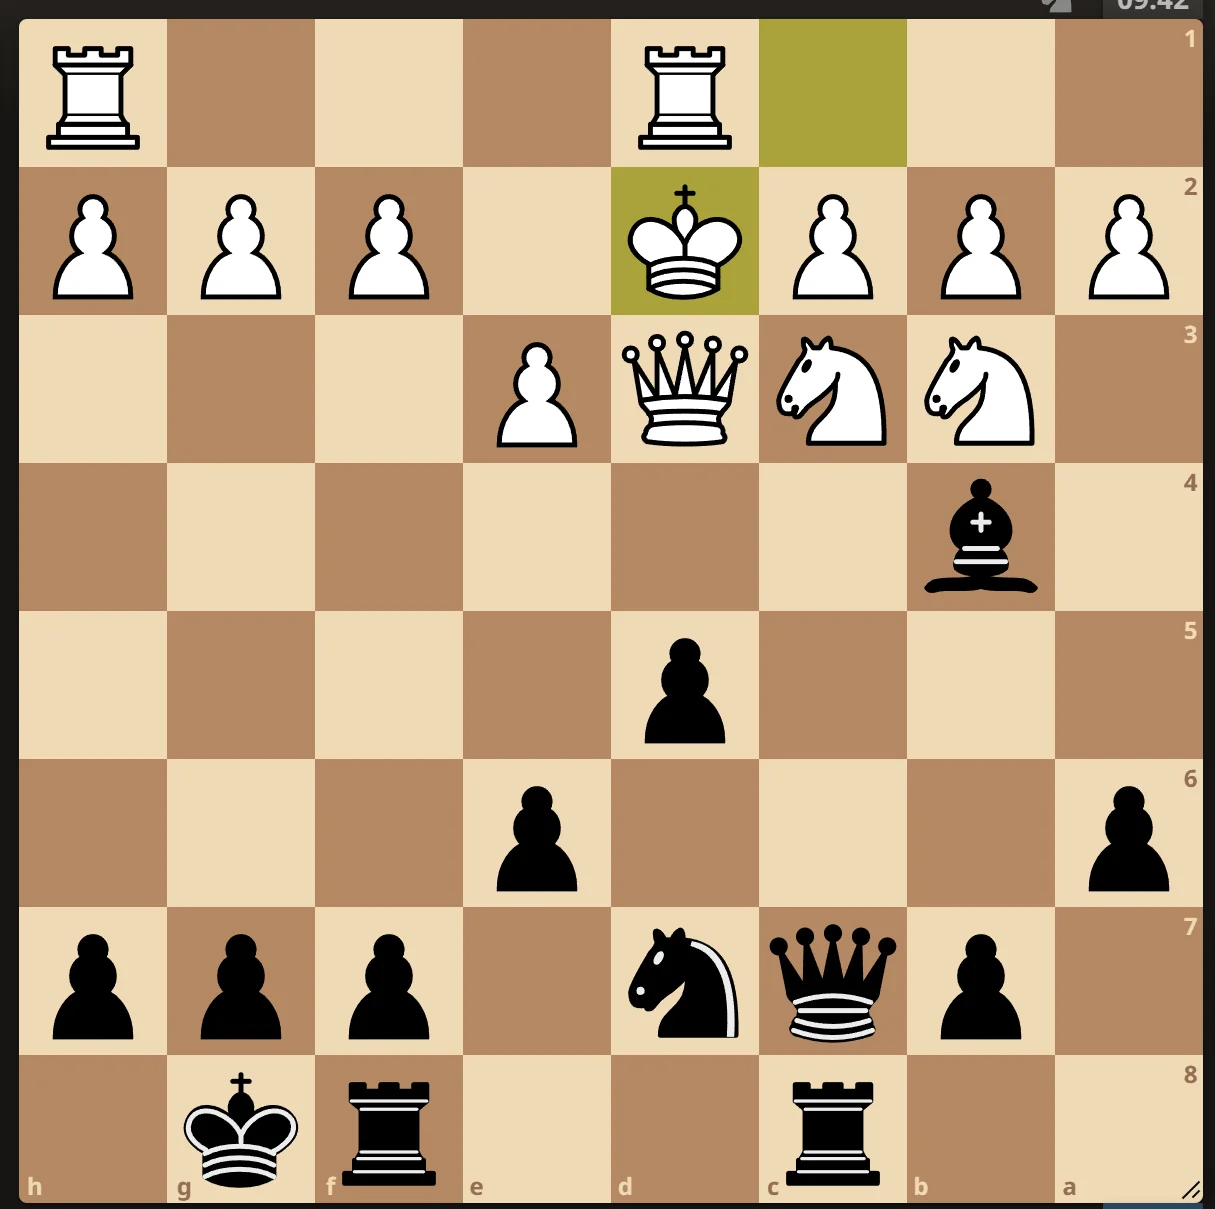 Where to Attack in Chess